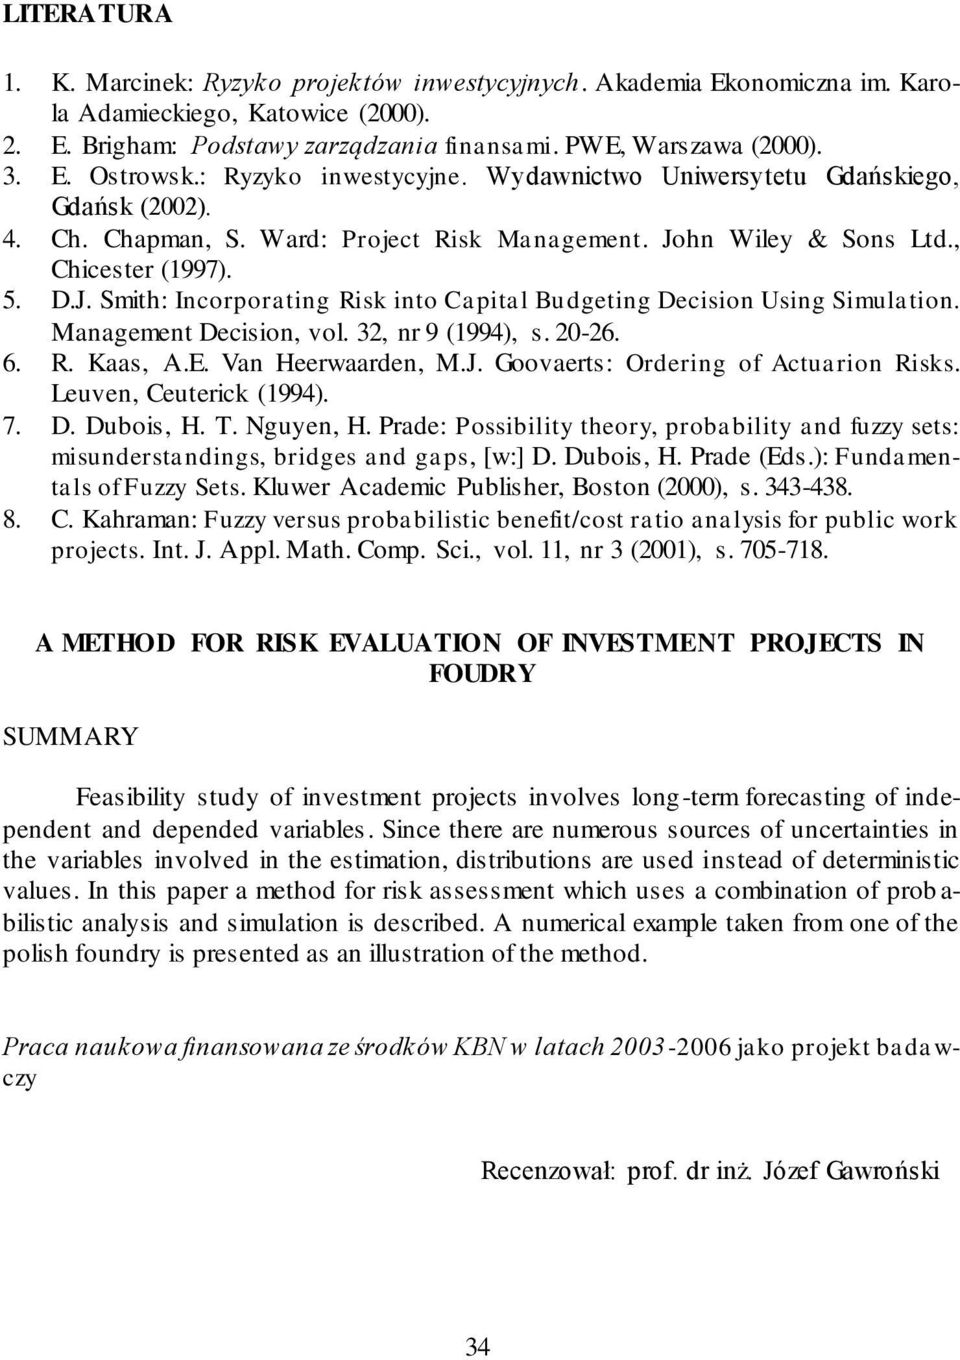 hn Wiley & Sons Ltd., Chicester (1997). 5. D.J. Smith: Incorporating Risk into Capital Budgeting Decision Using Simulation. Management Decision, vol. 32, nr 9 (1994), s. 20-26. 6. R. Kaas, A.E.